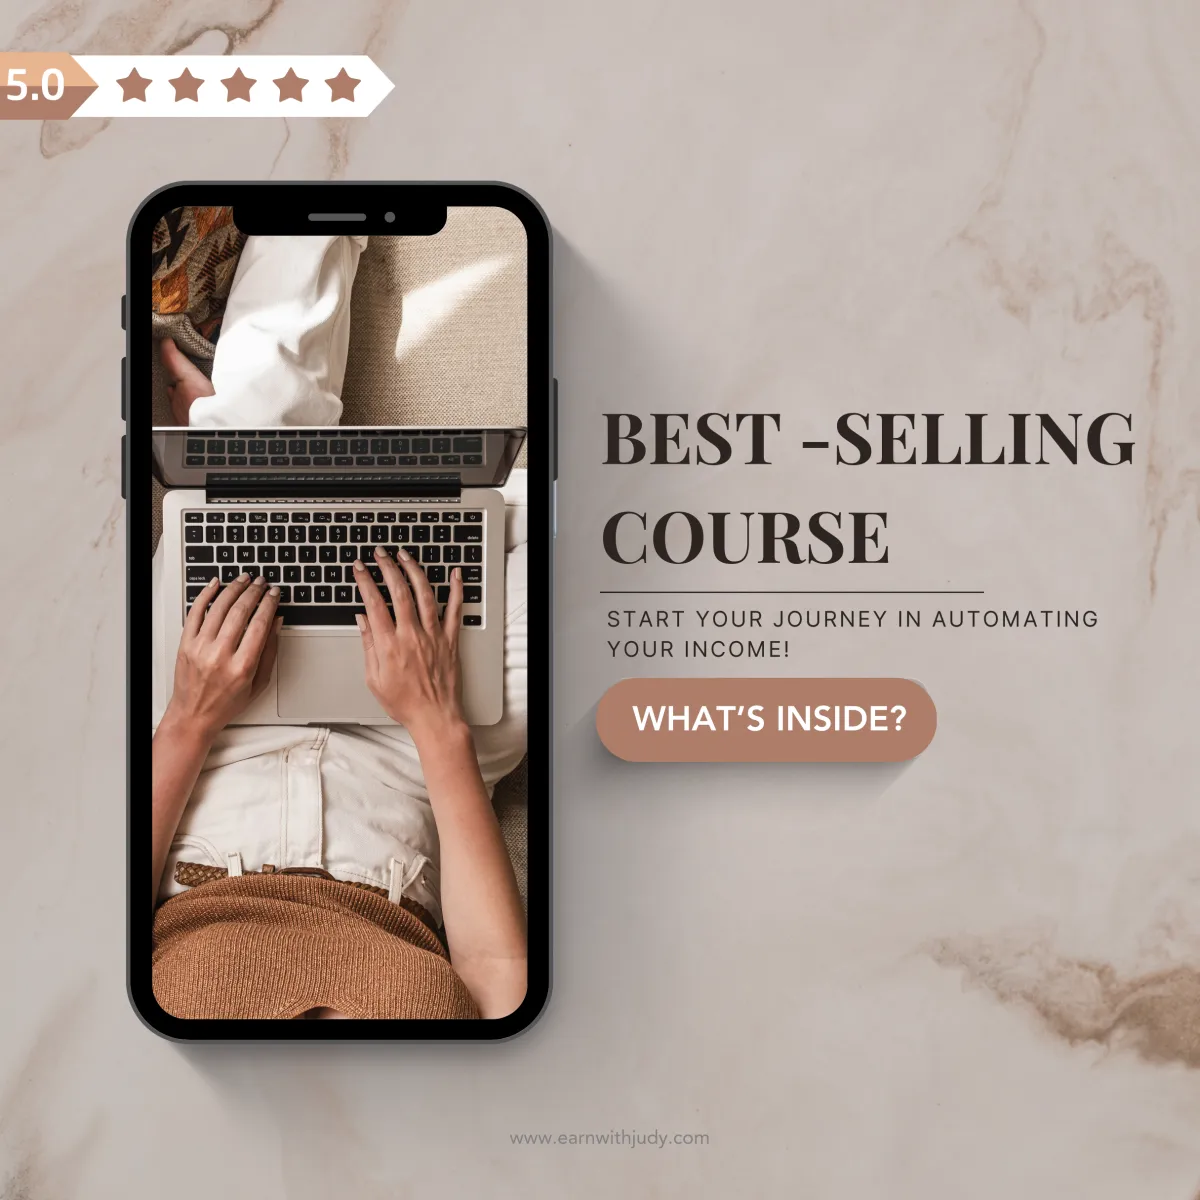 Lepo max, best selling course all about digital marketing with master resell rights